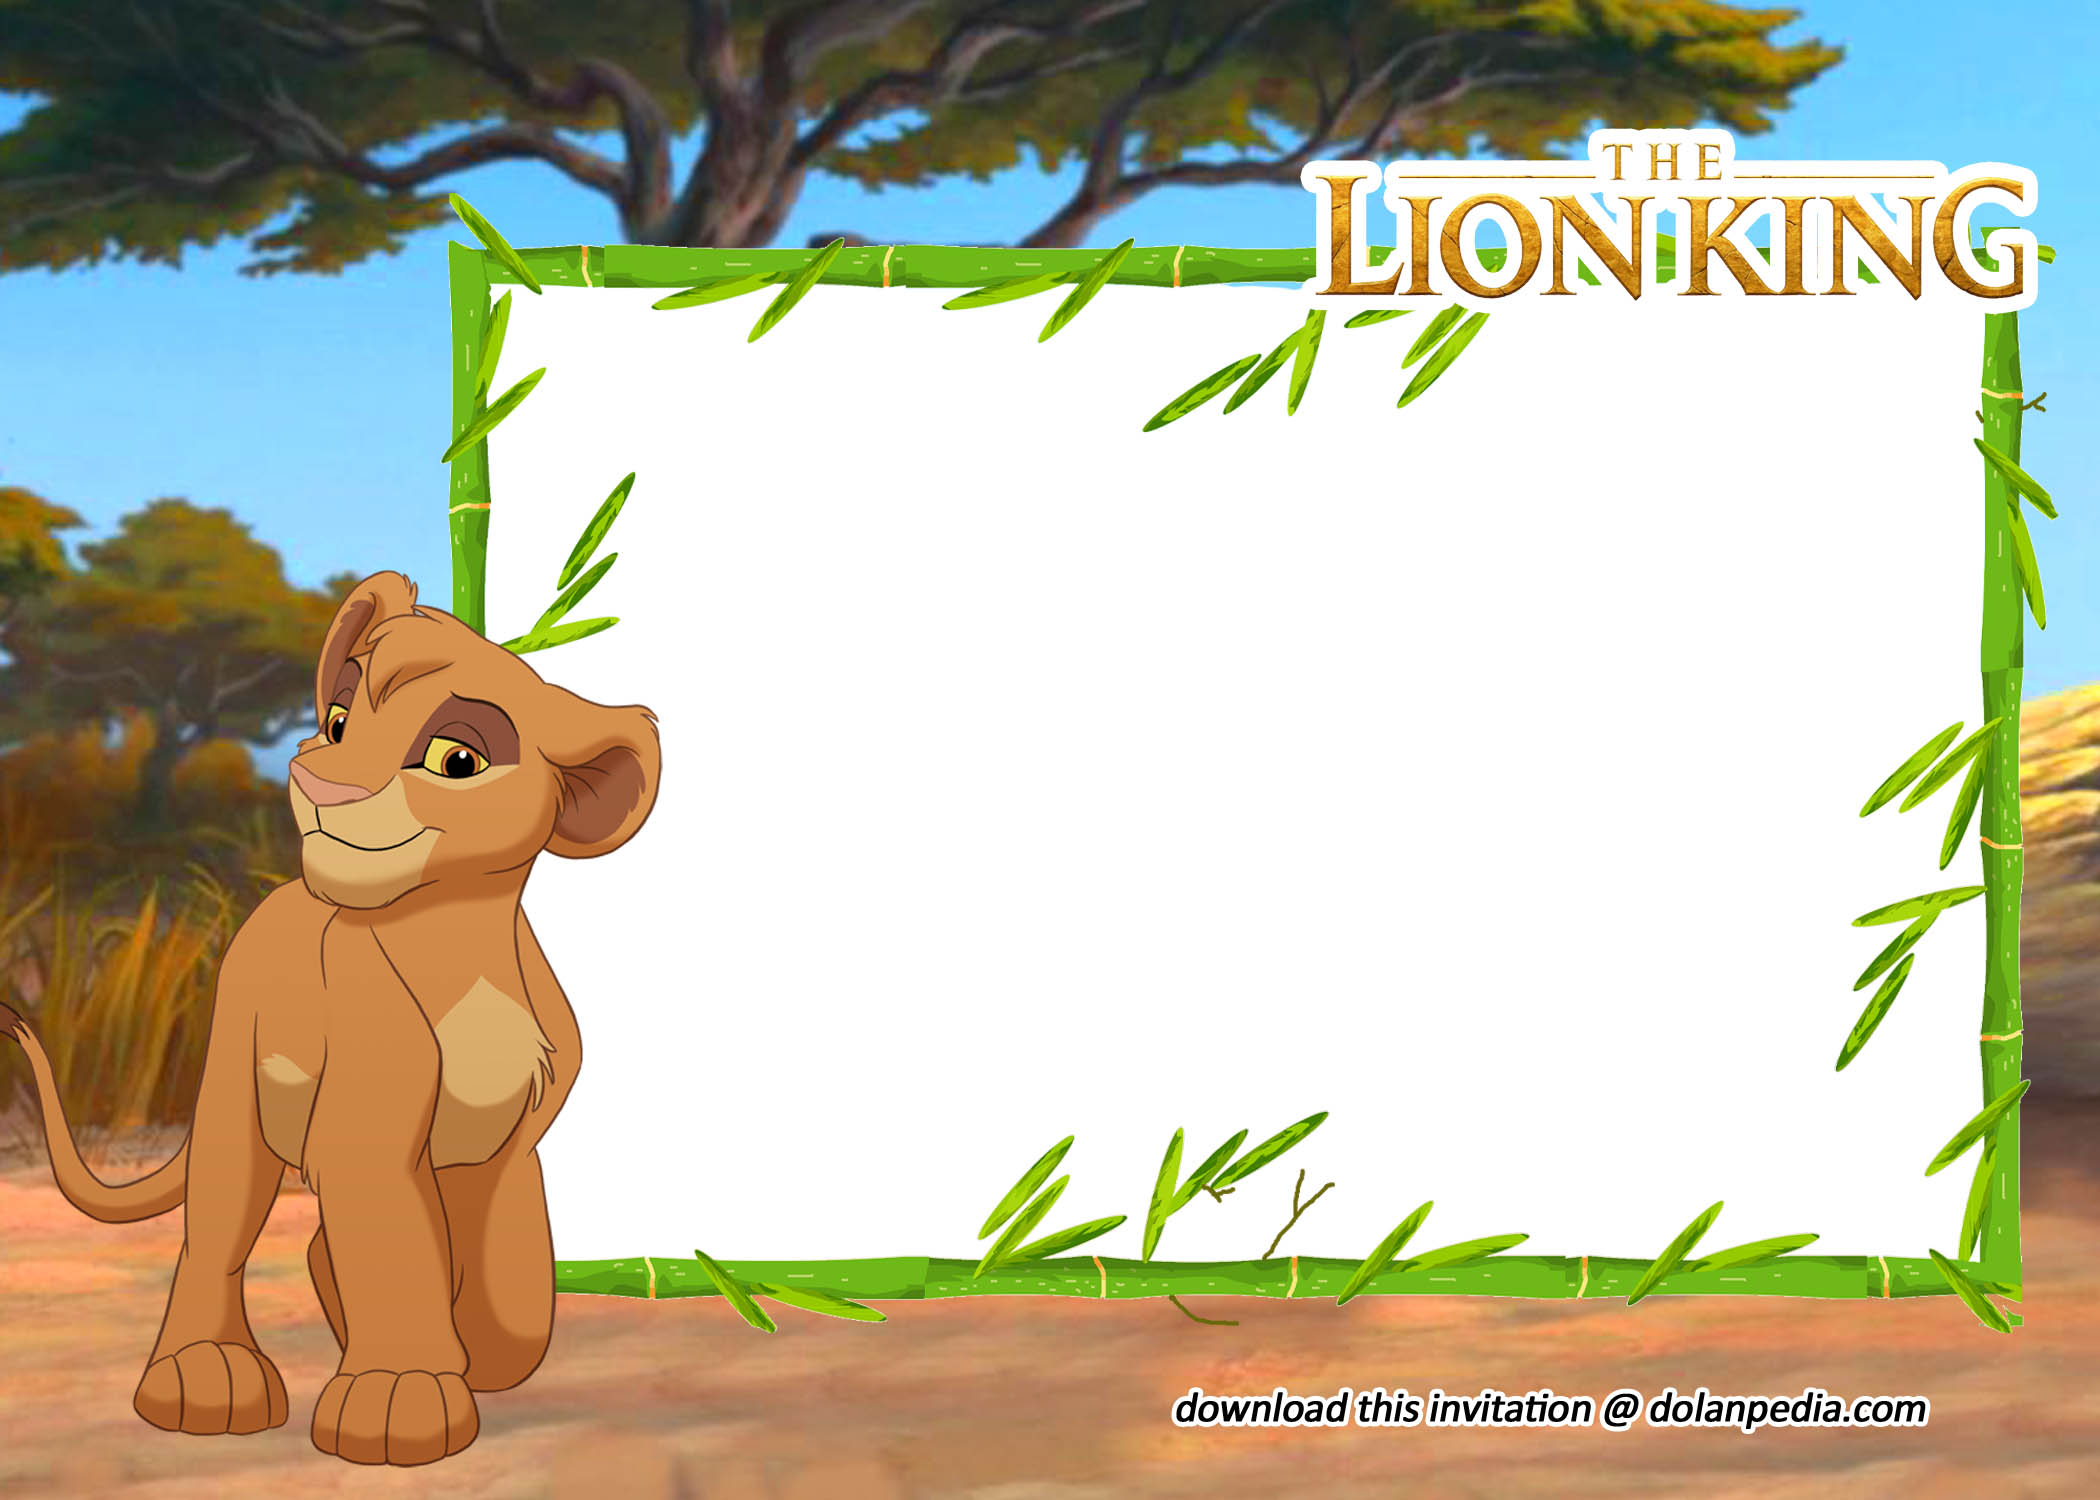 DownloadablePrintable Personalised The Lion King children Birthday Party Invitation